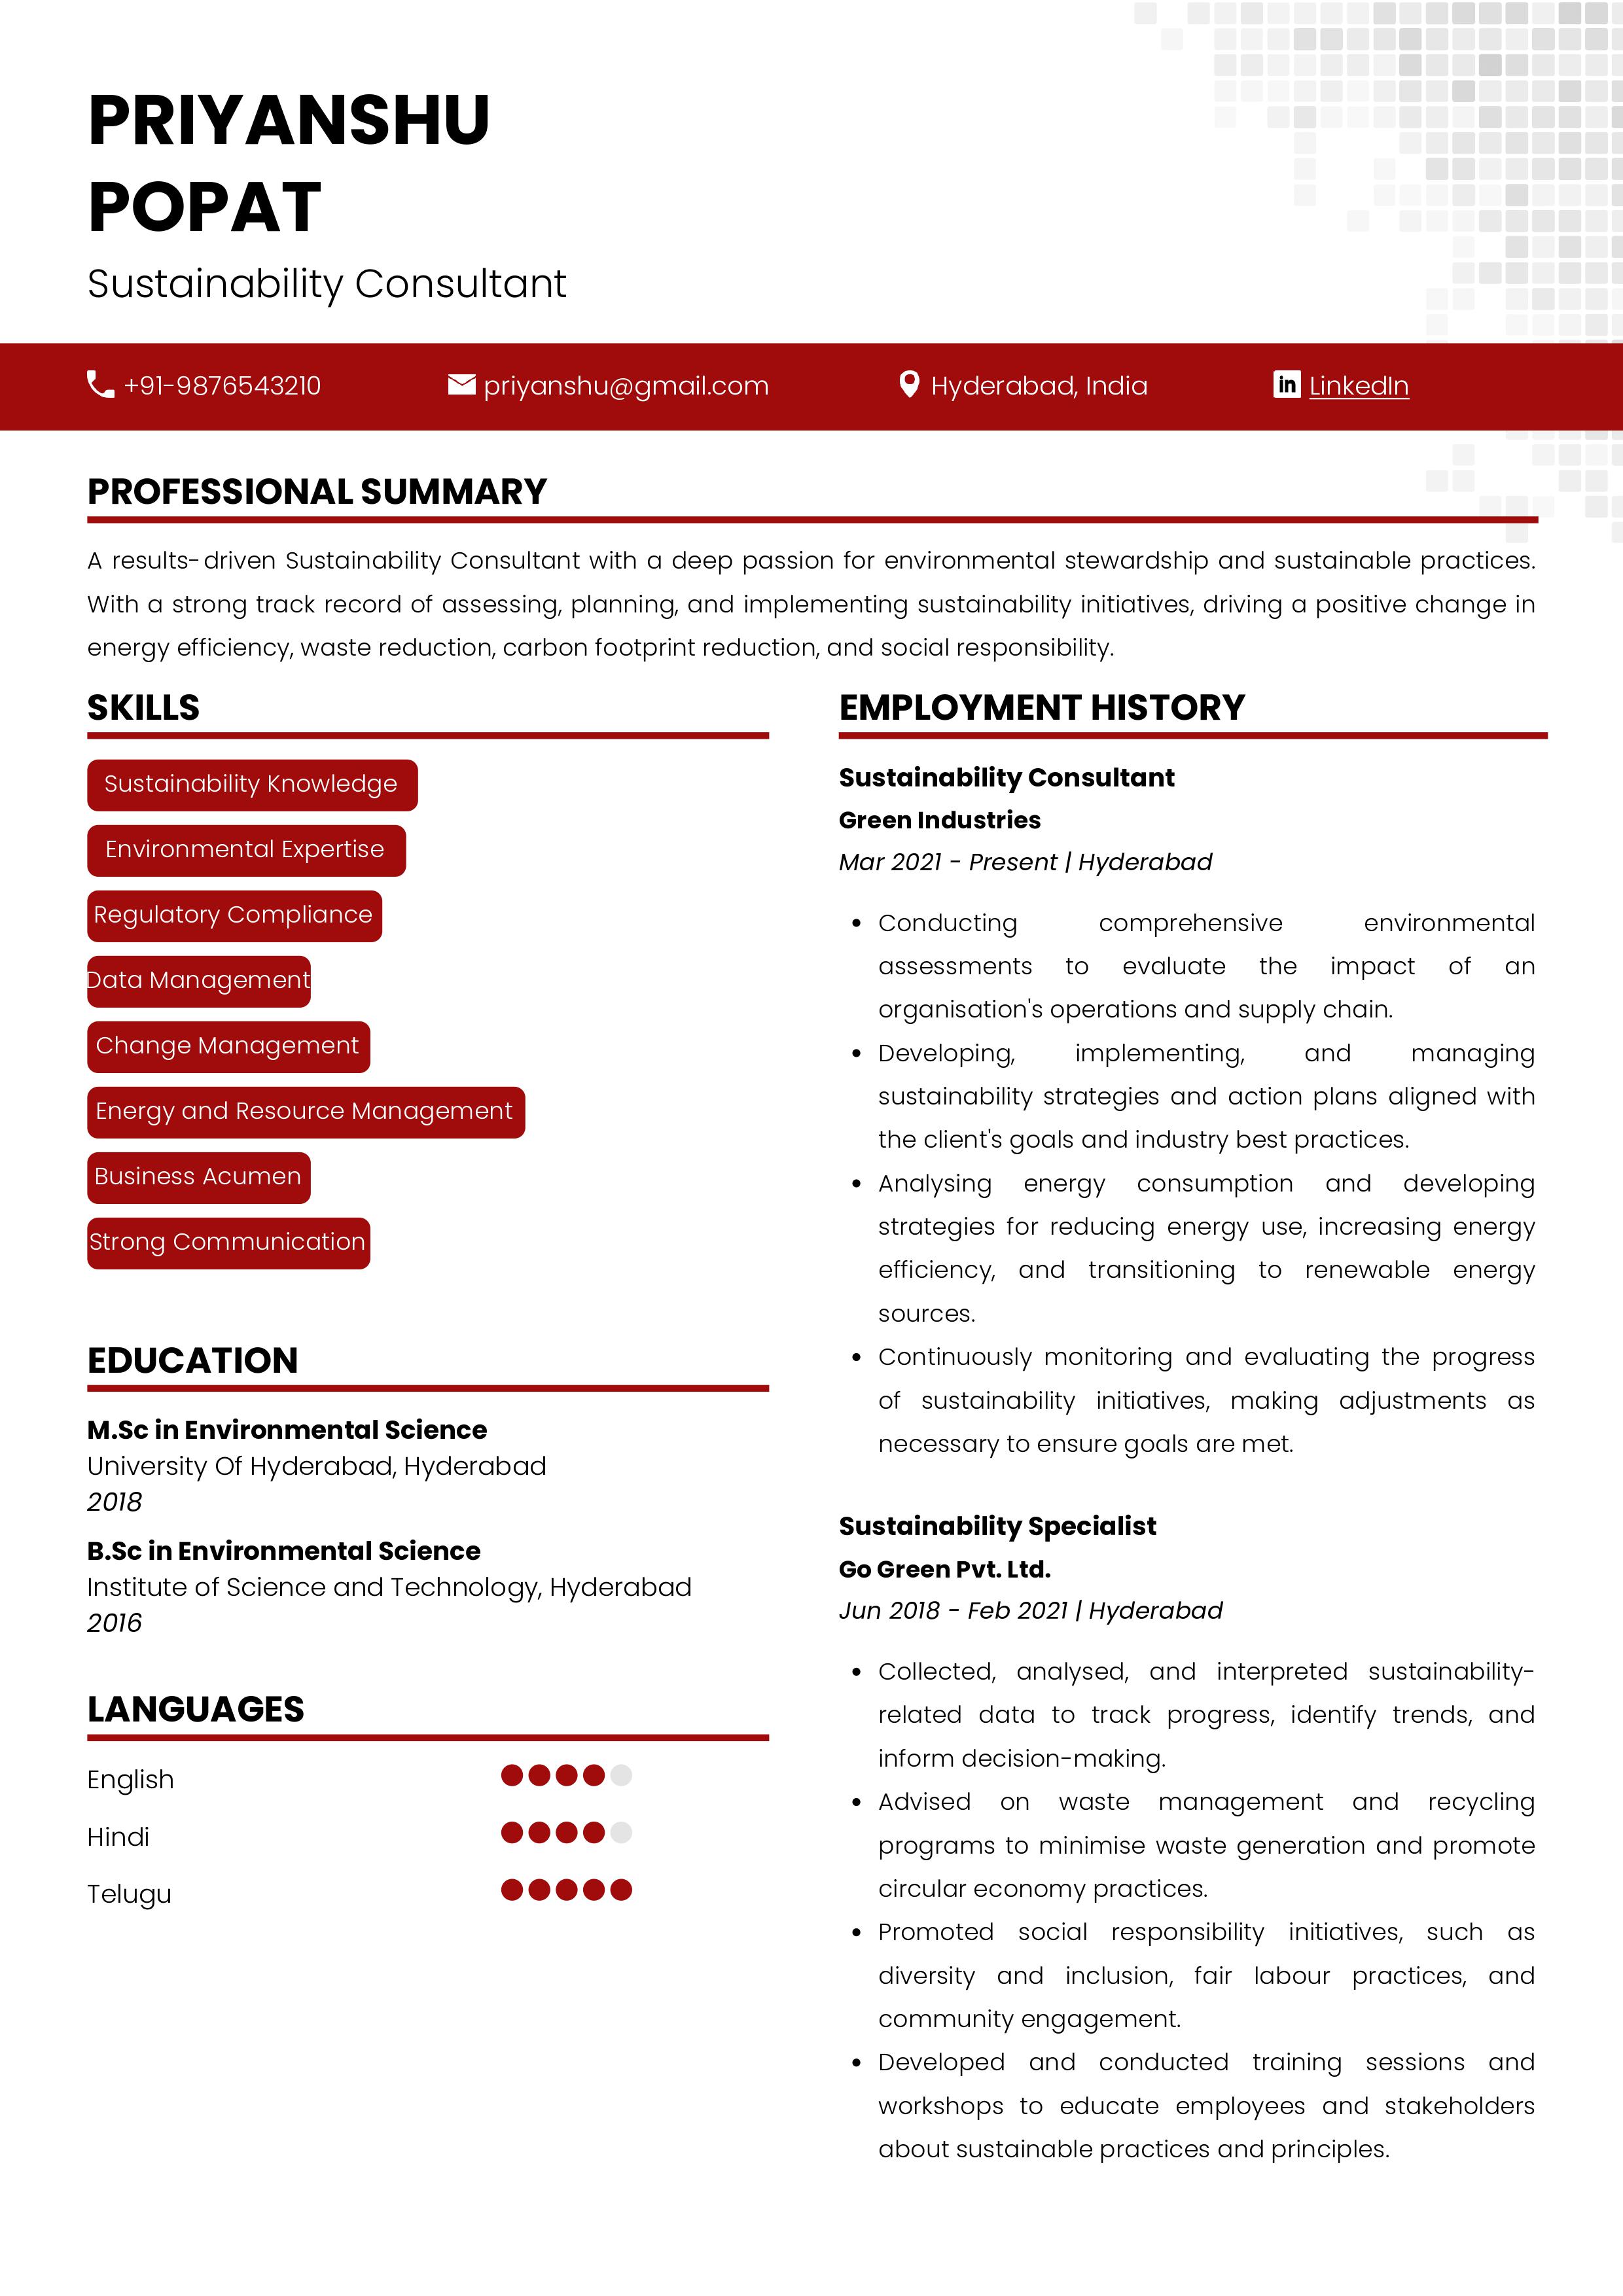 Sample Resume of Sustainability Consultant | Free Resume Templates & Samples on Resumod.co